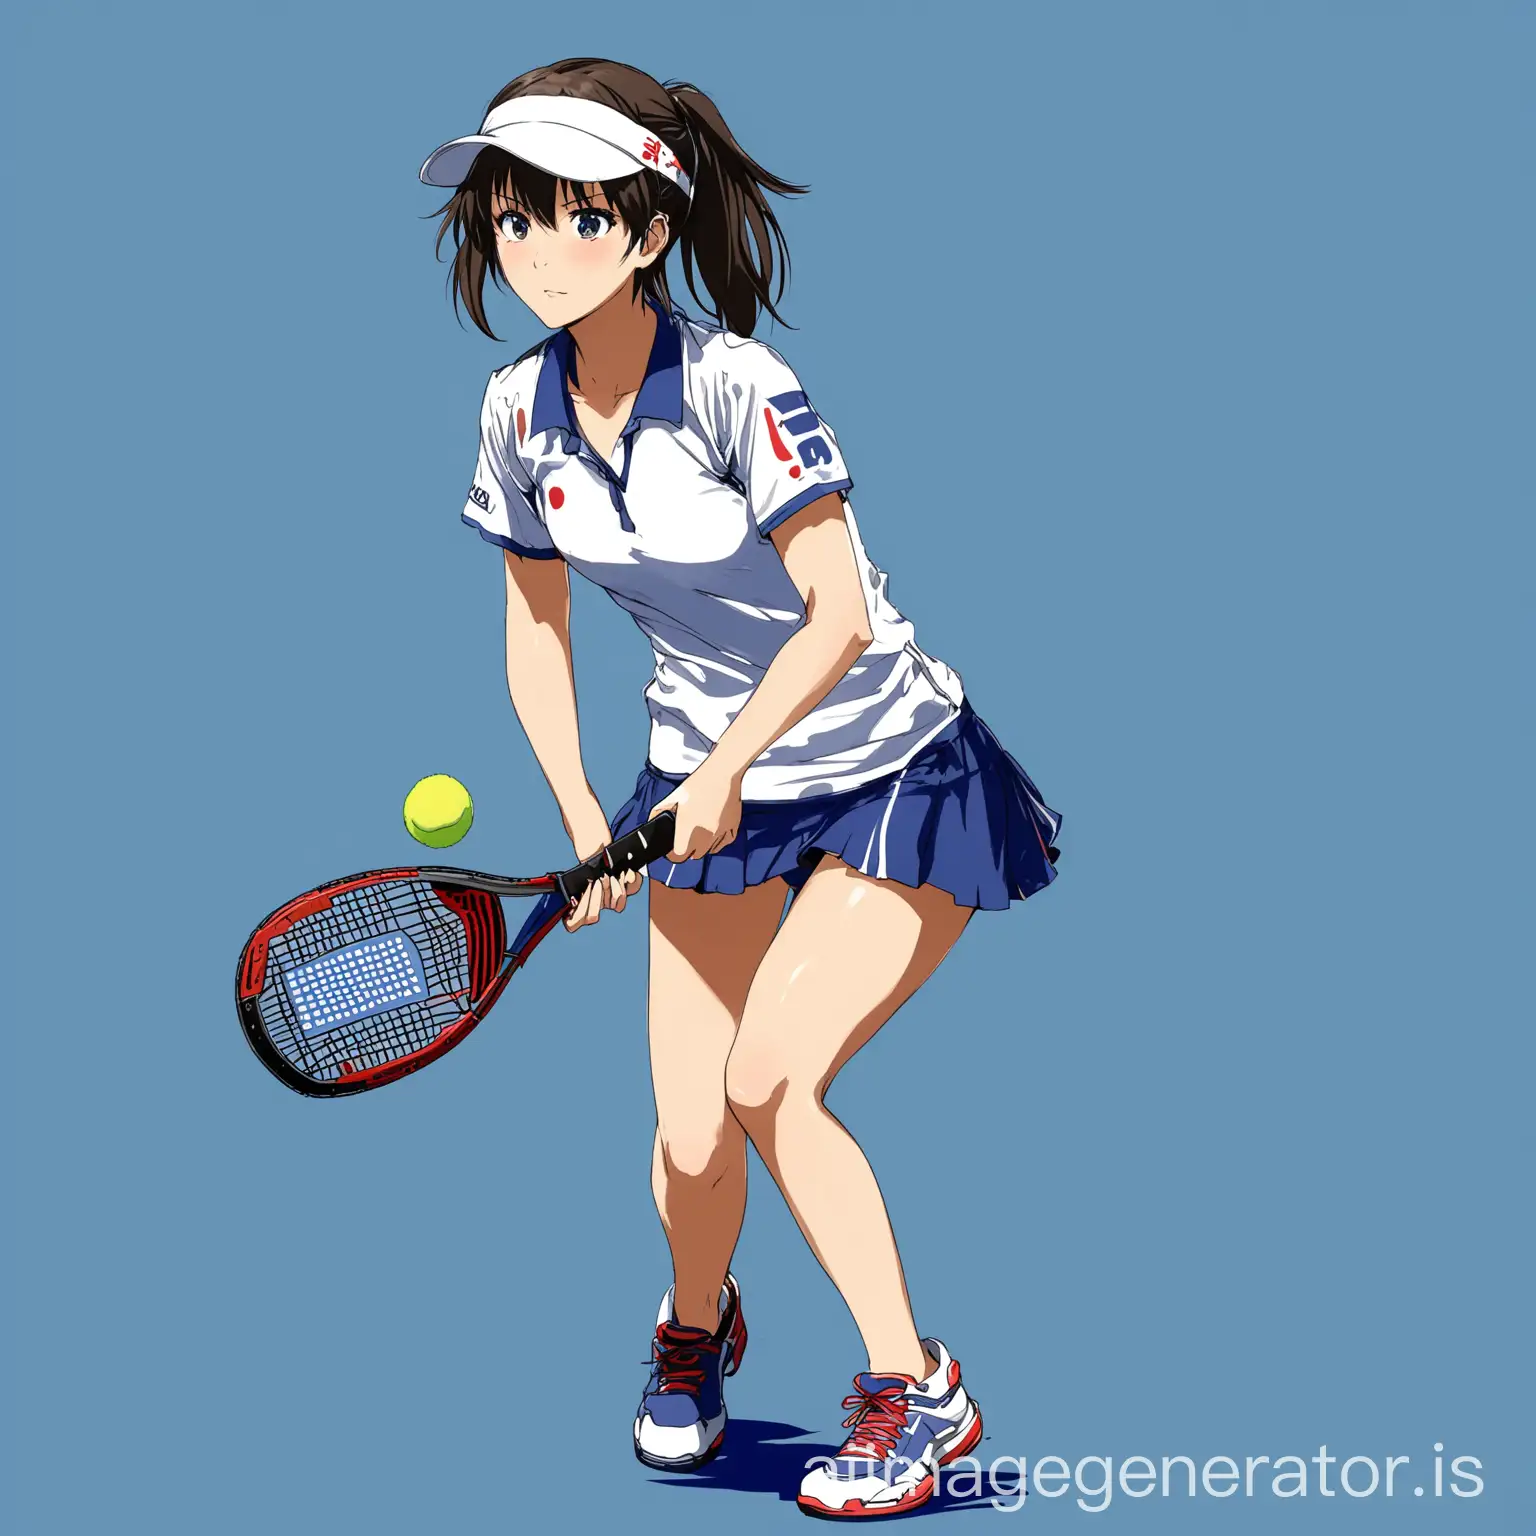 Anime-Female-Padel-Player-in-Action